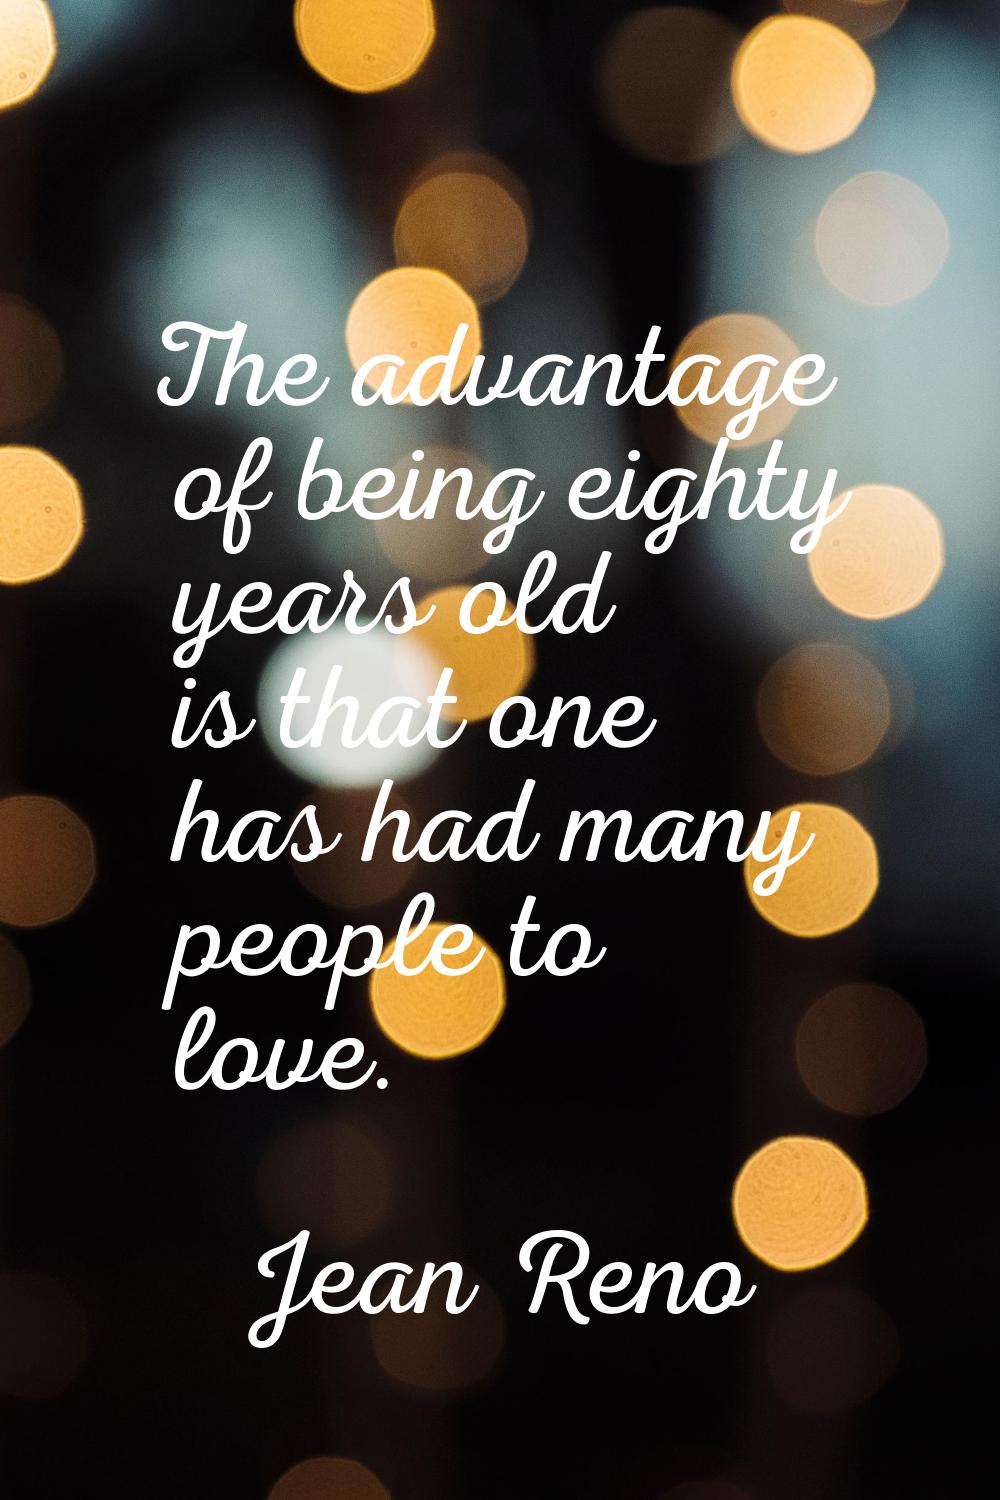 The advantage of being eighty years old is that one has had many people to love.